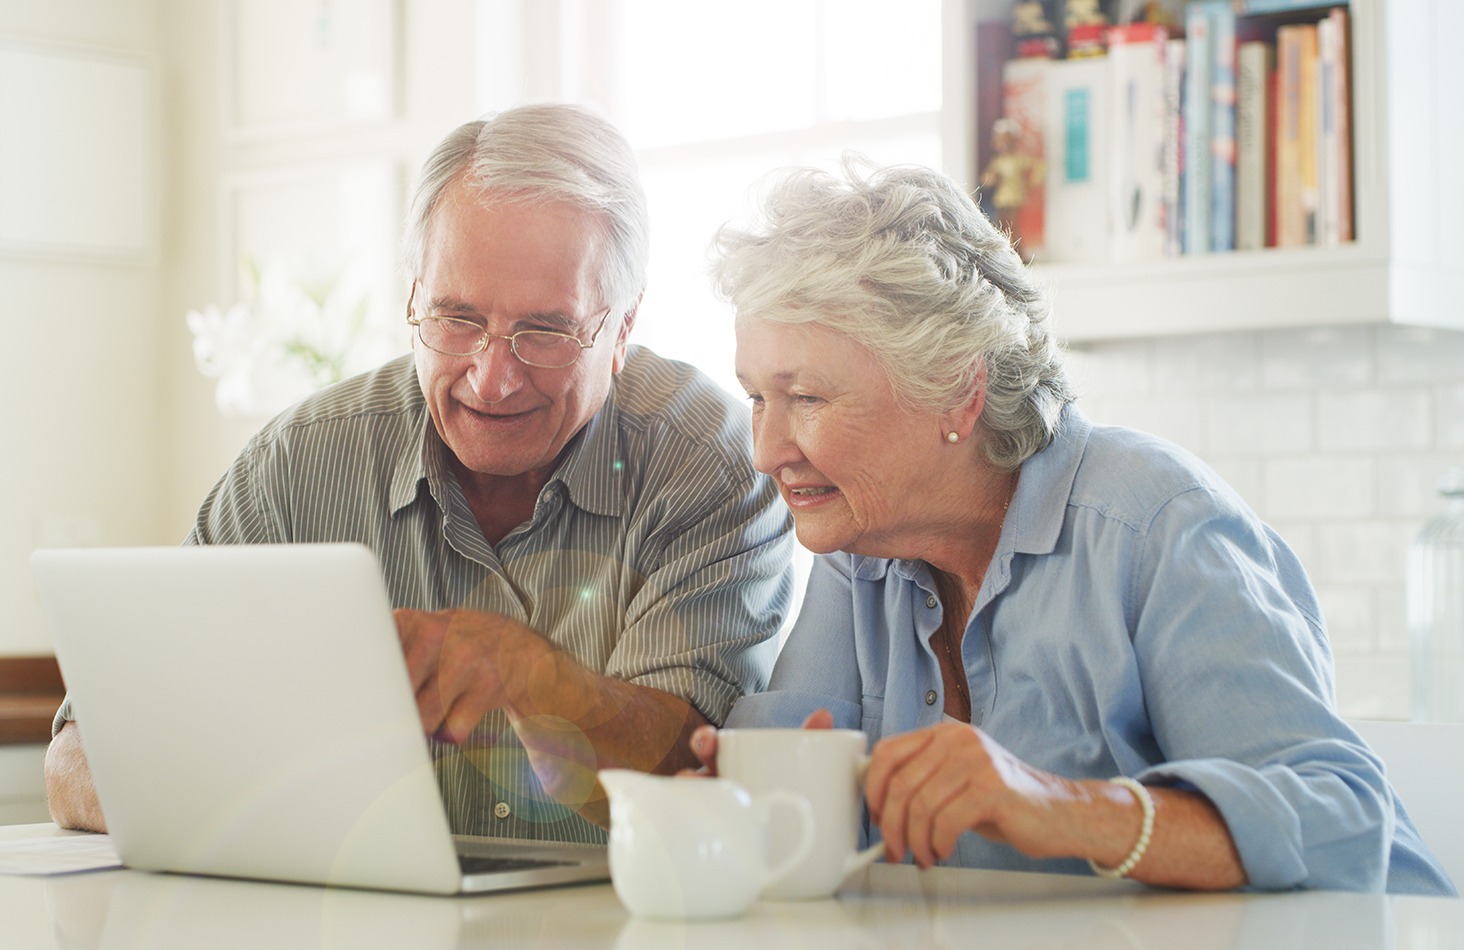 Senior couple looking at a laptop computer together while drinking coffee